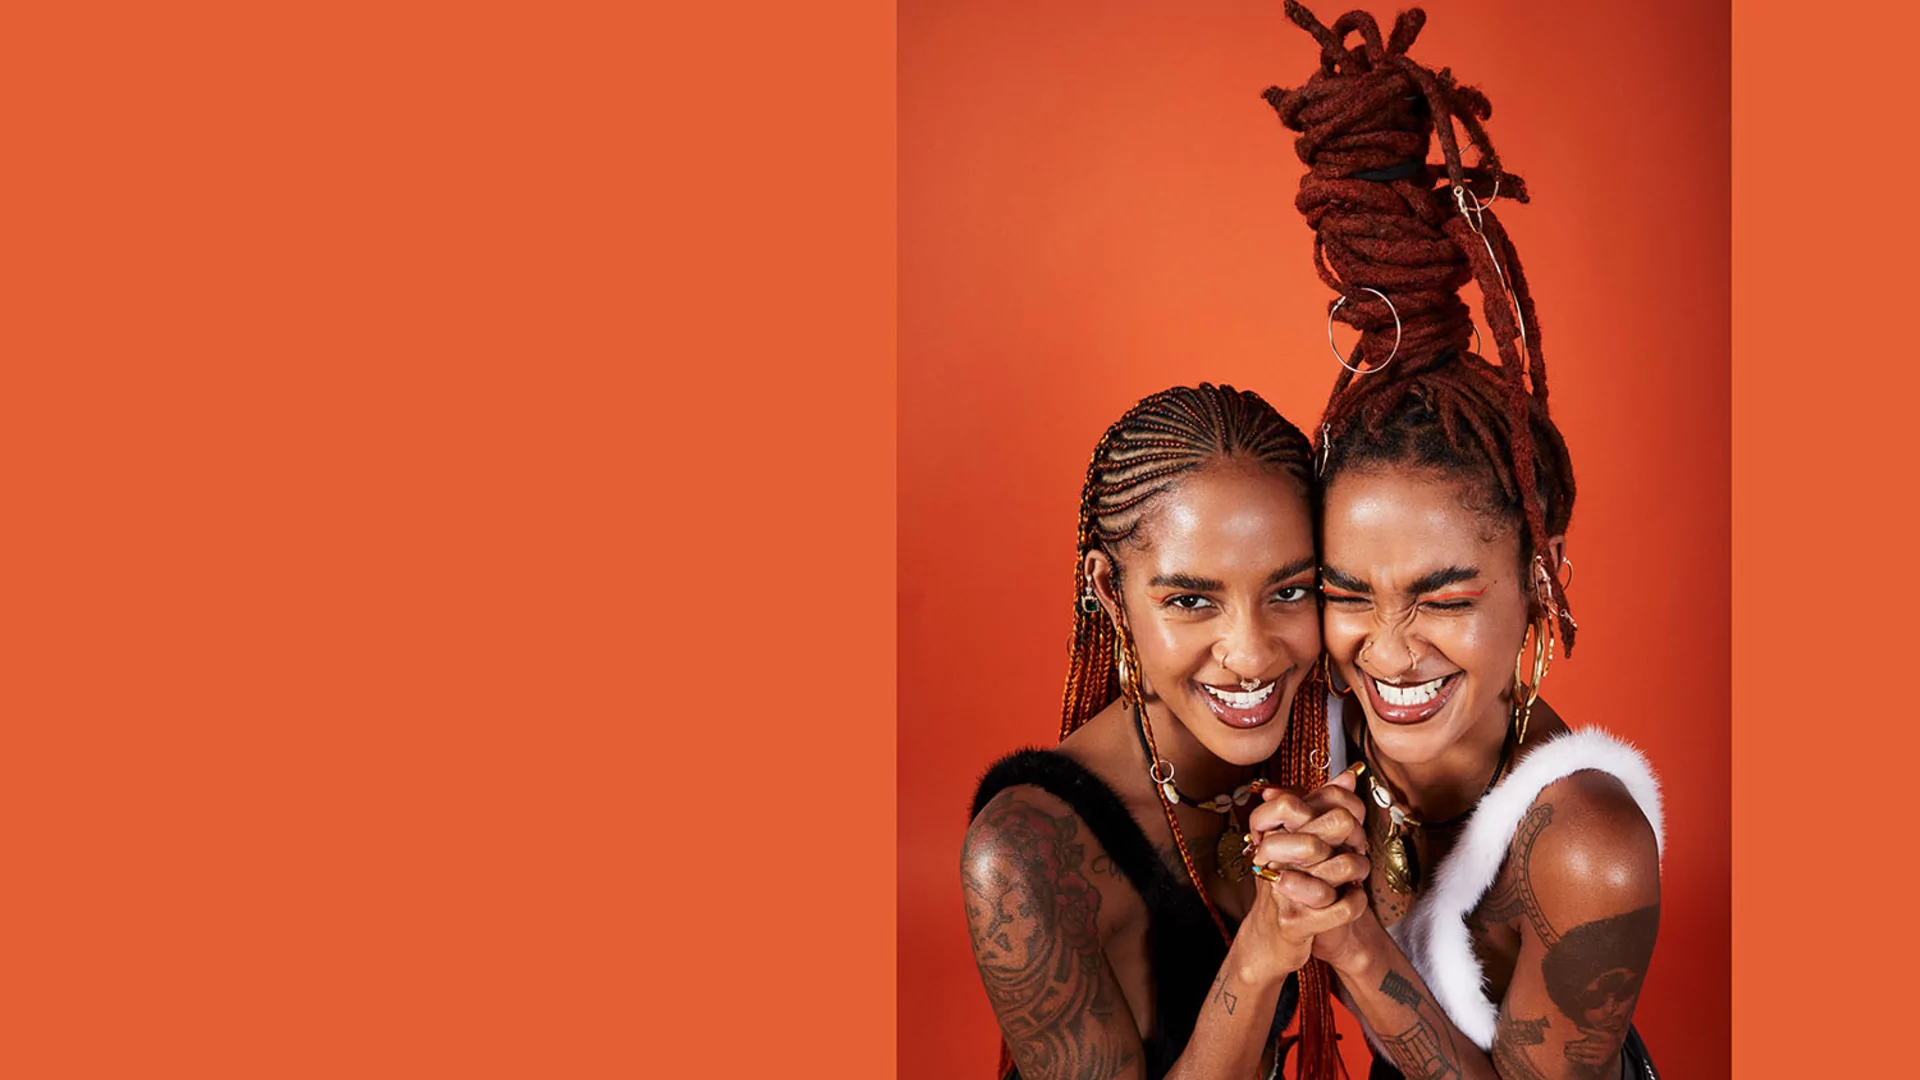 DJ Mag north america cover shot of Coco & Breezy grinning while holding their hands together in front of their faces